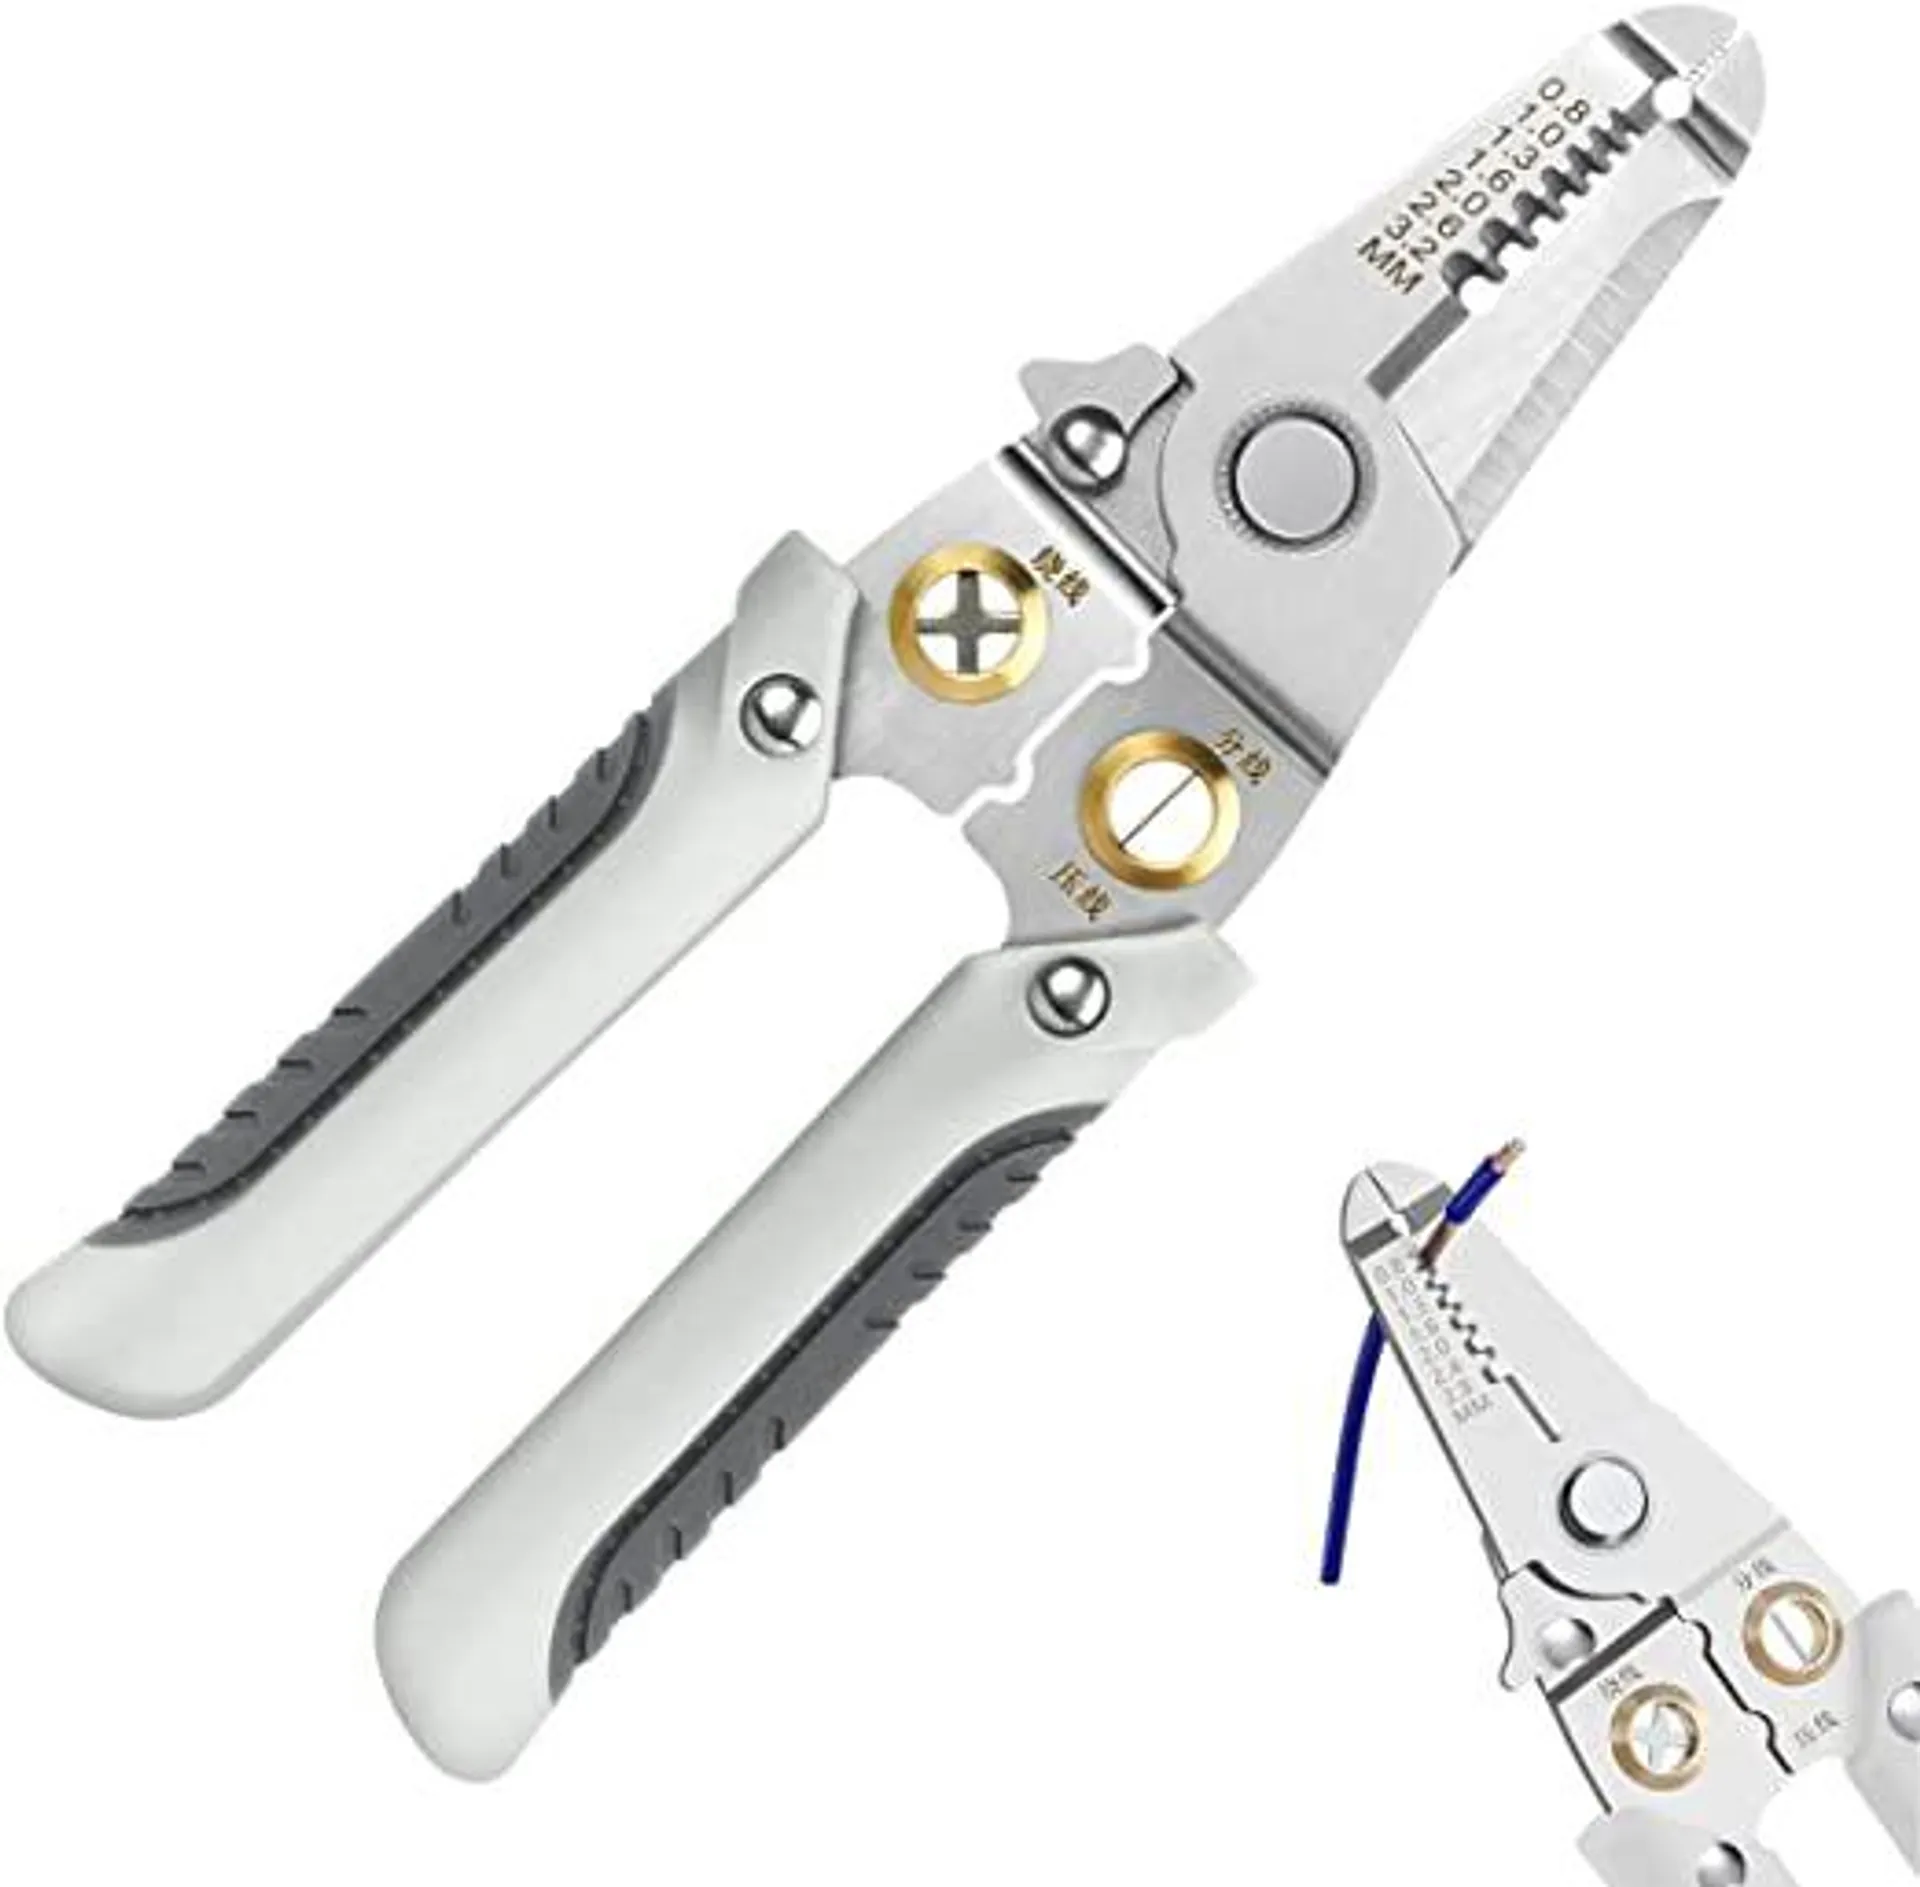 Special Wire Stripper for Electrician, 6 in 1 Multifunction Wire Pliers Tool for Electric Cable Stripping Cutting Cable Stripper and Crimping (Grey)